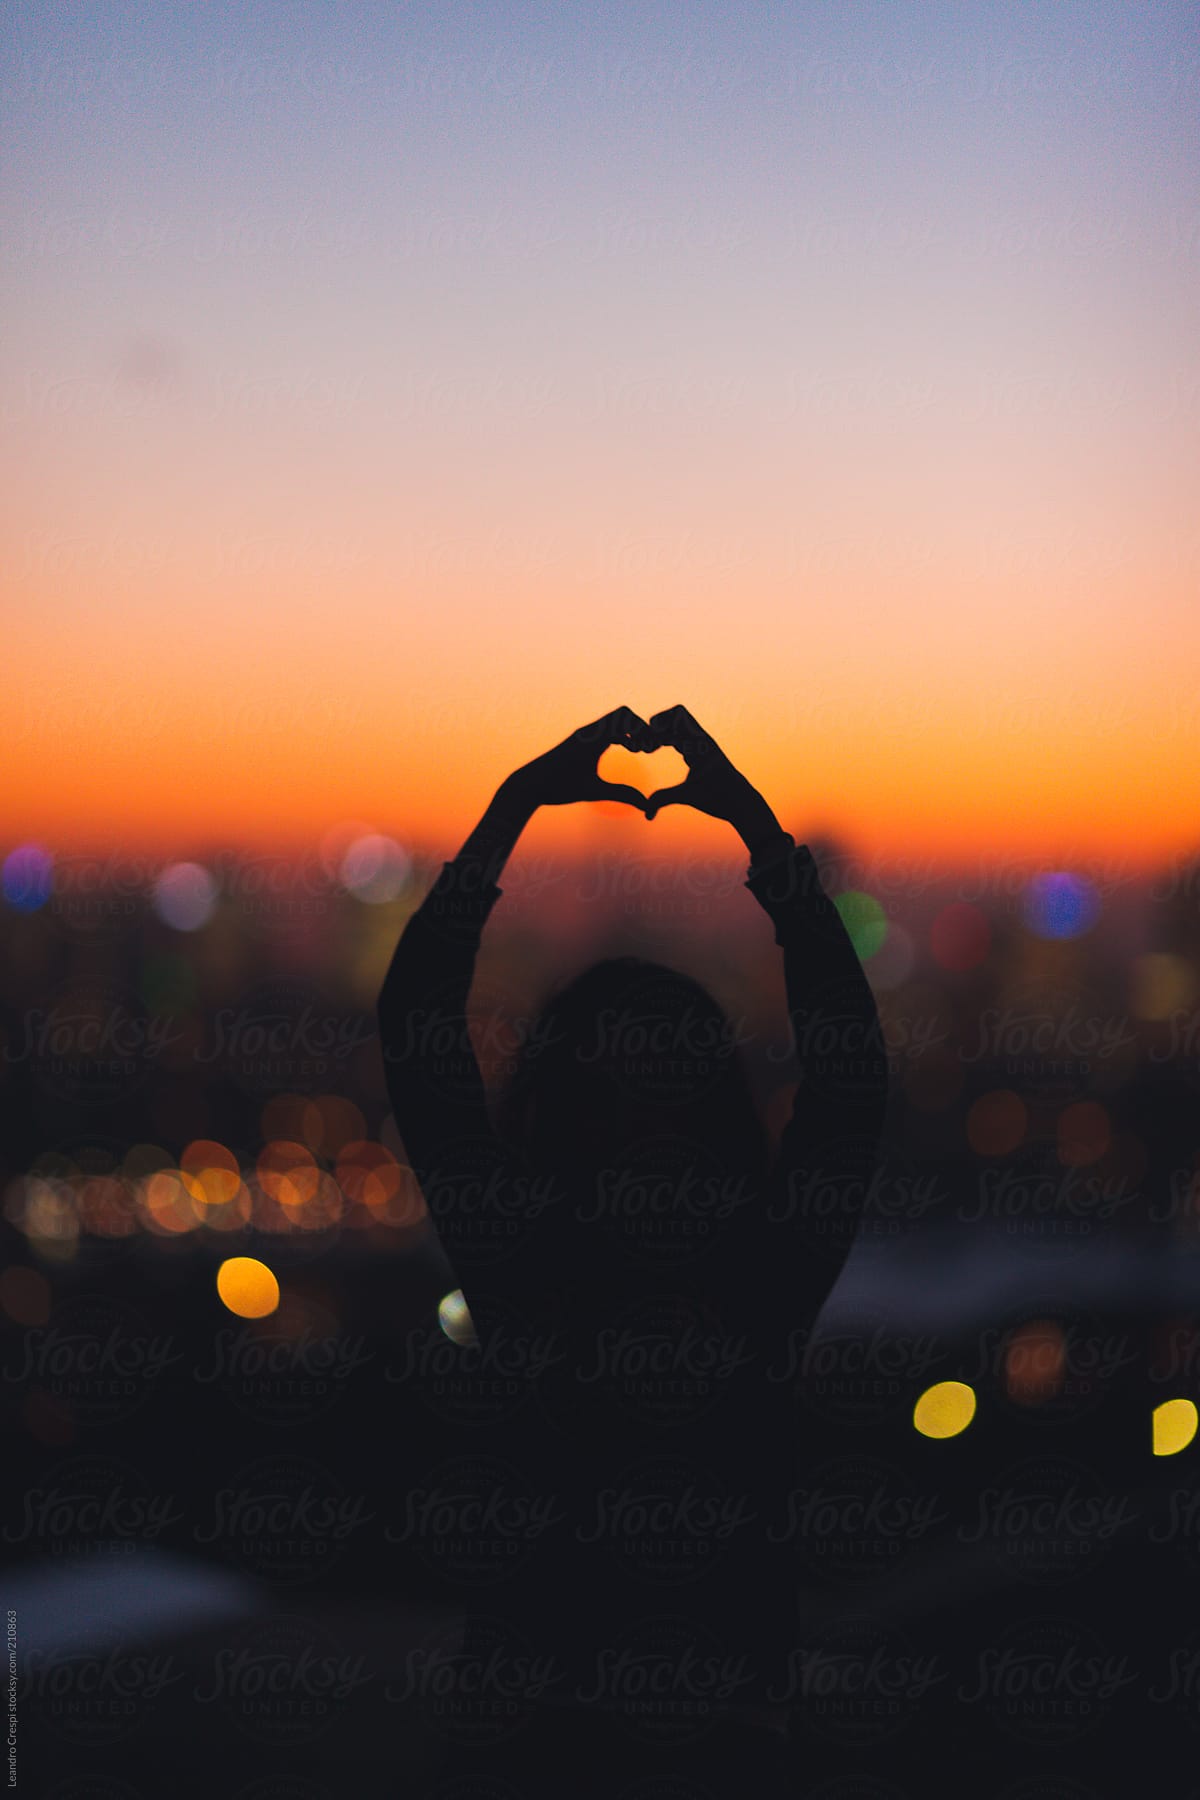 Woman in silhouette making heart shape with hands on sunset